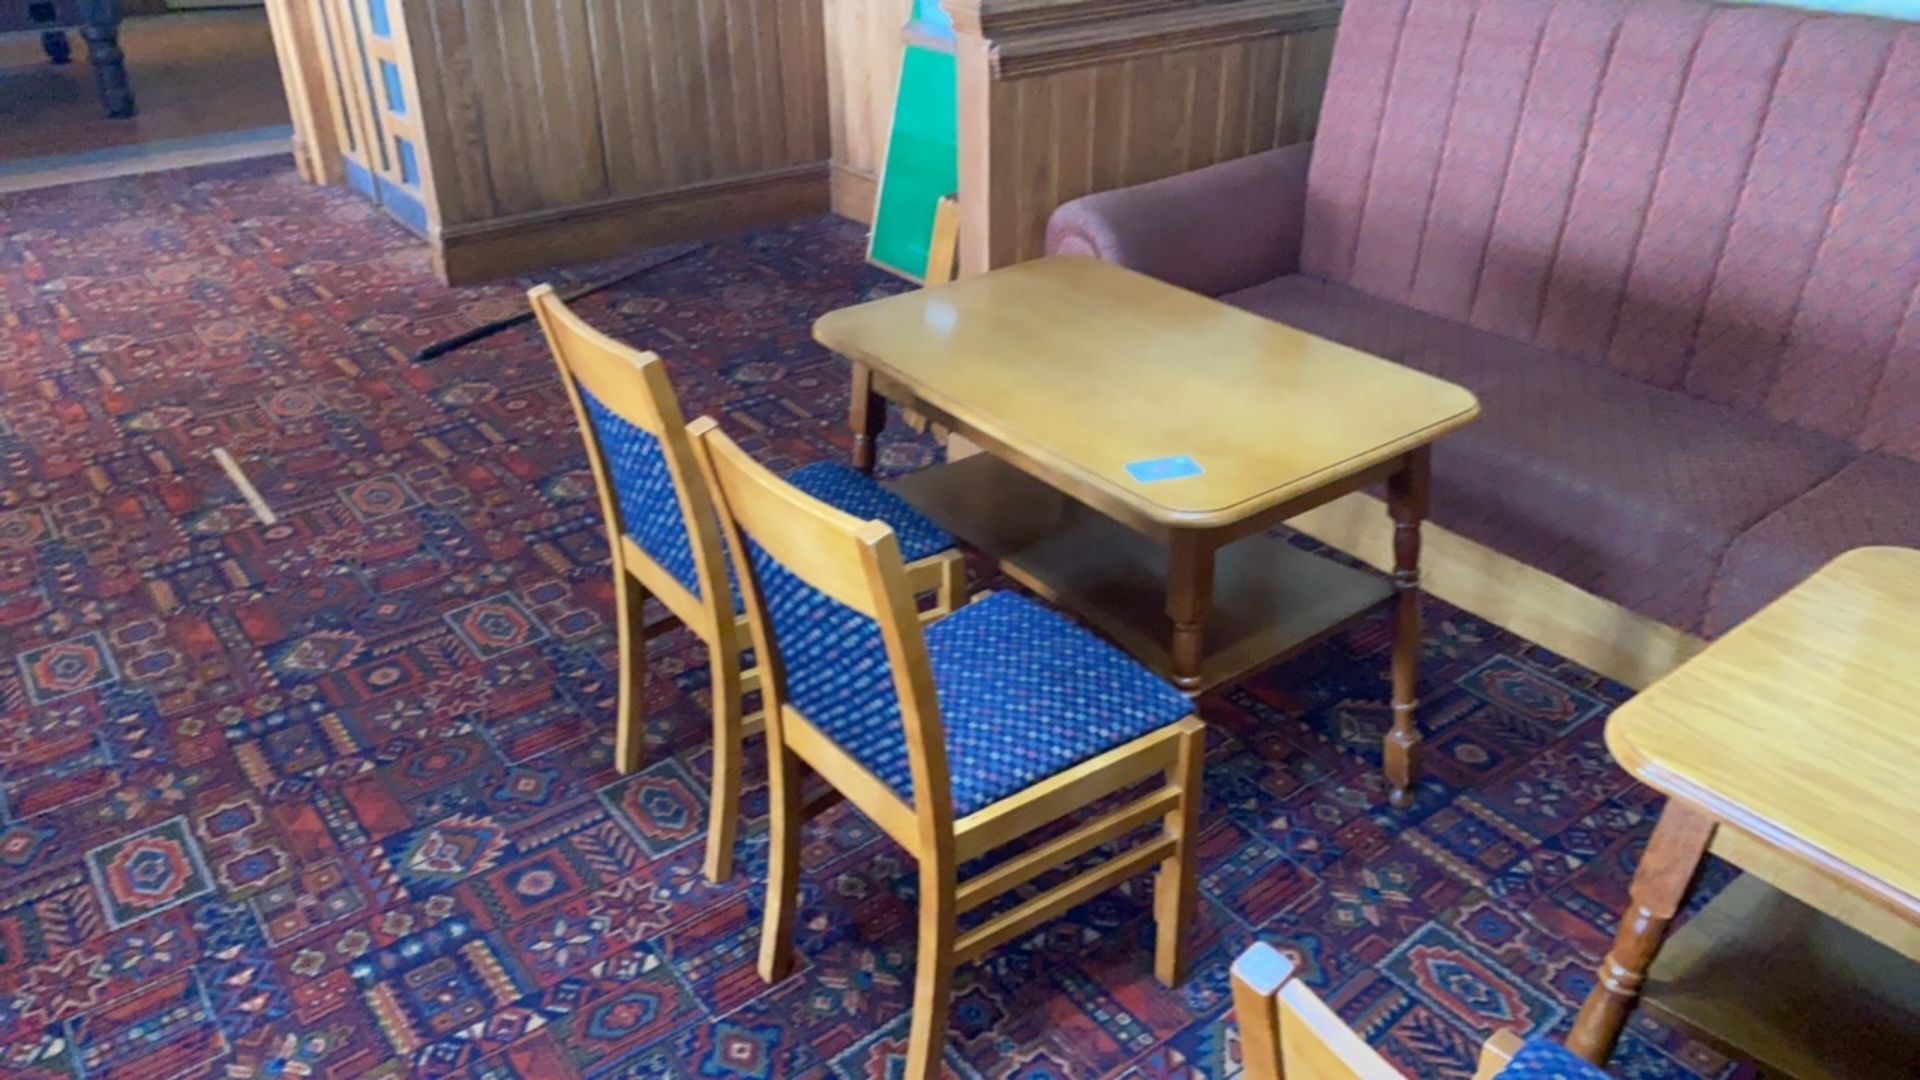 Wooden Rectangular Table With Two Wooden Framed Chairs - Image 2 of 4